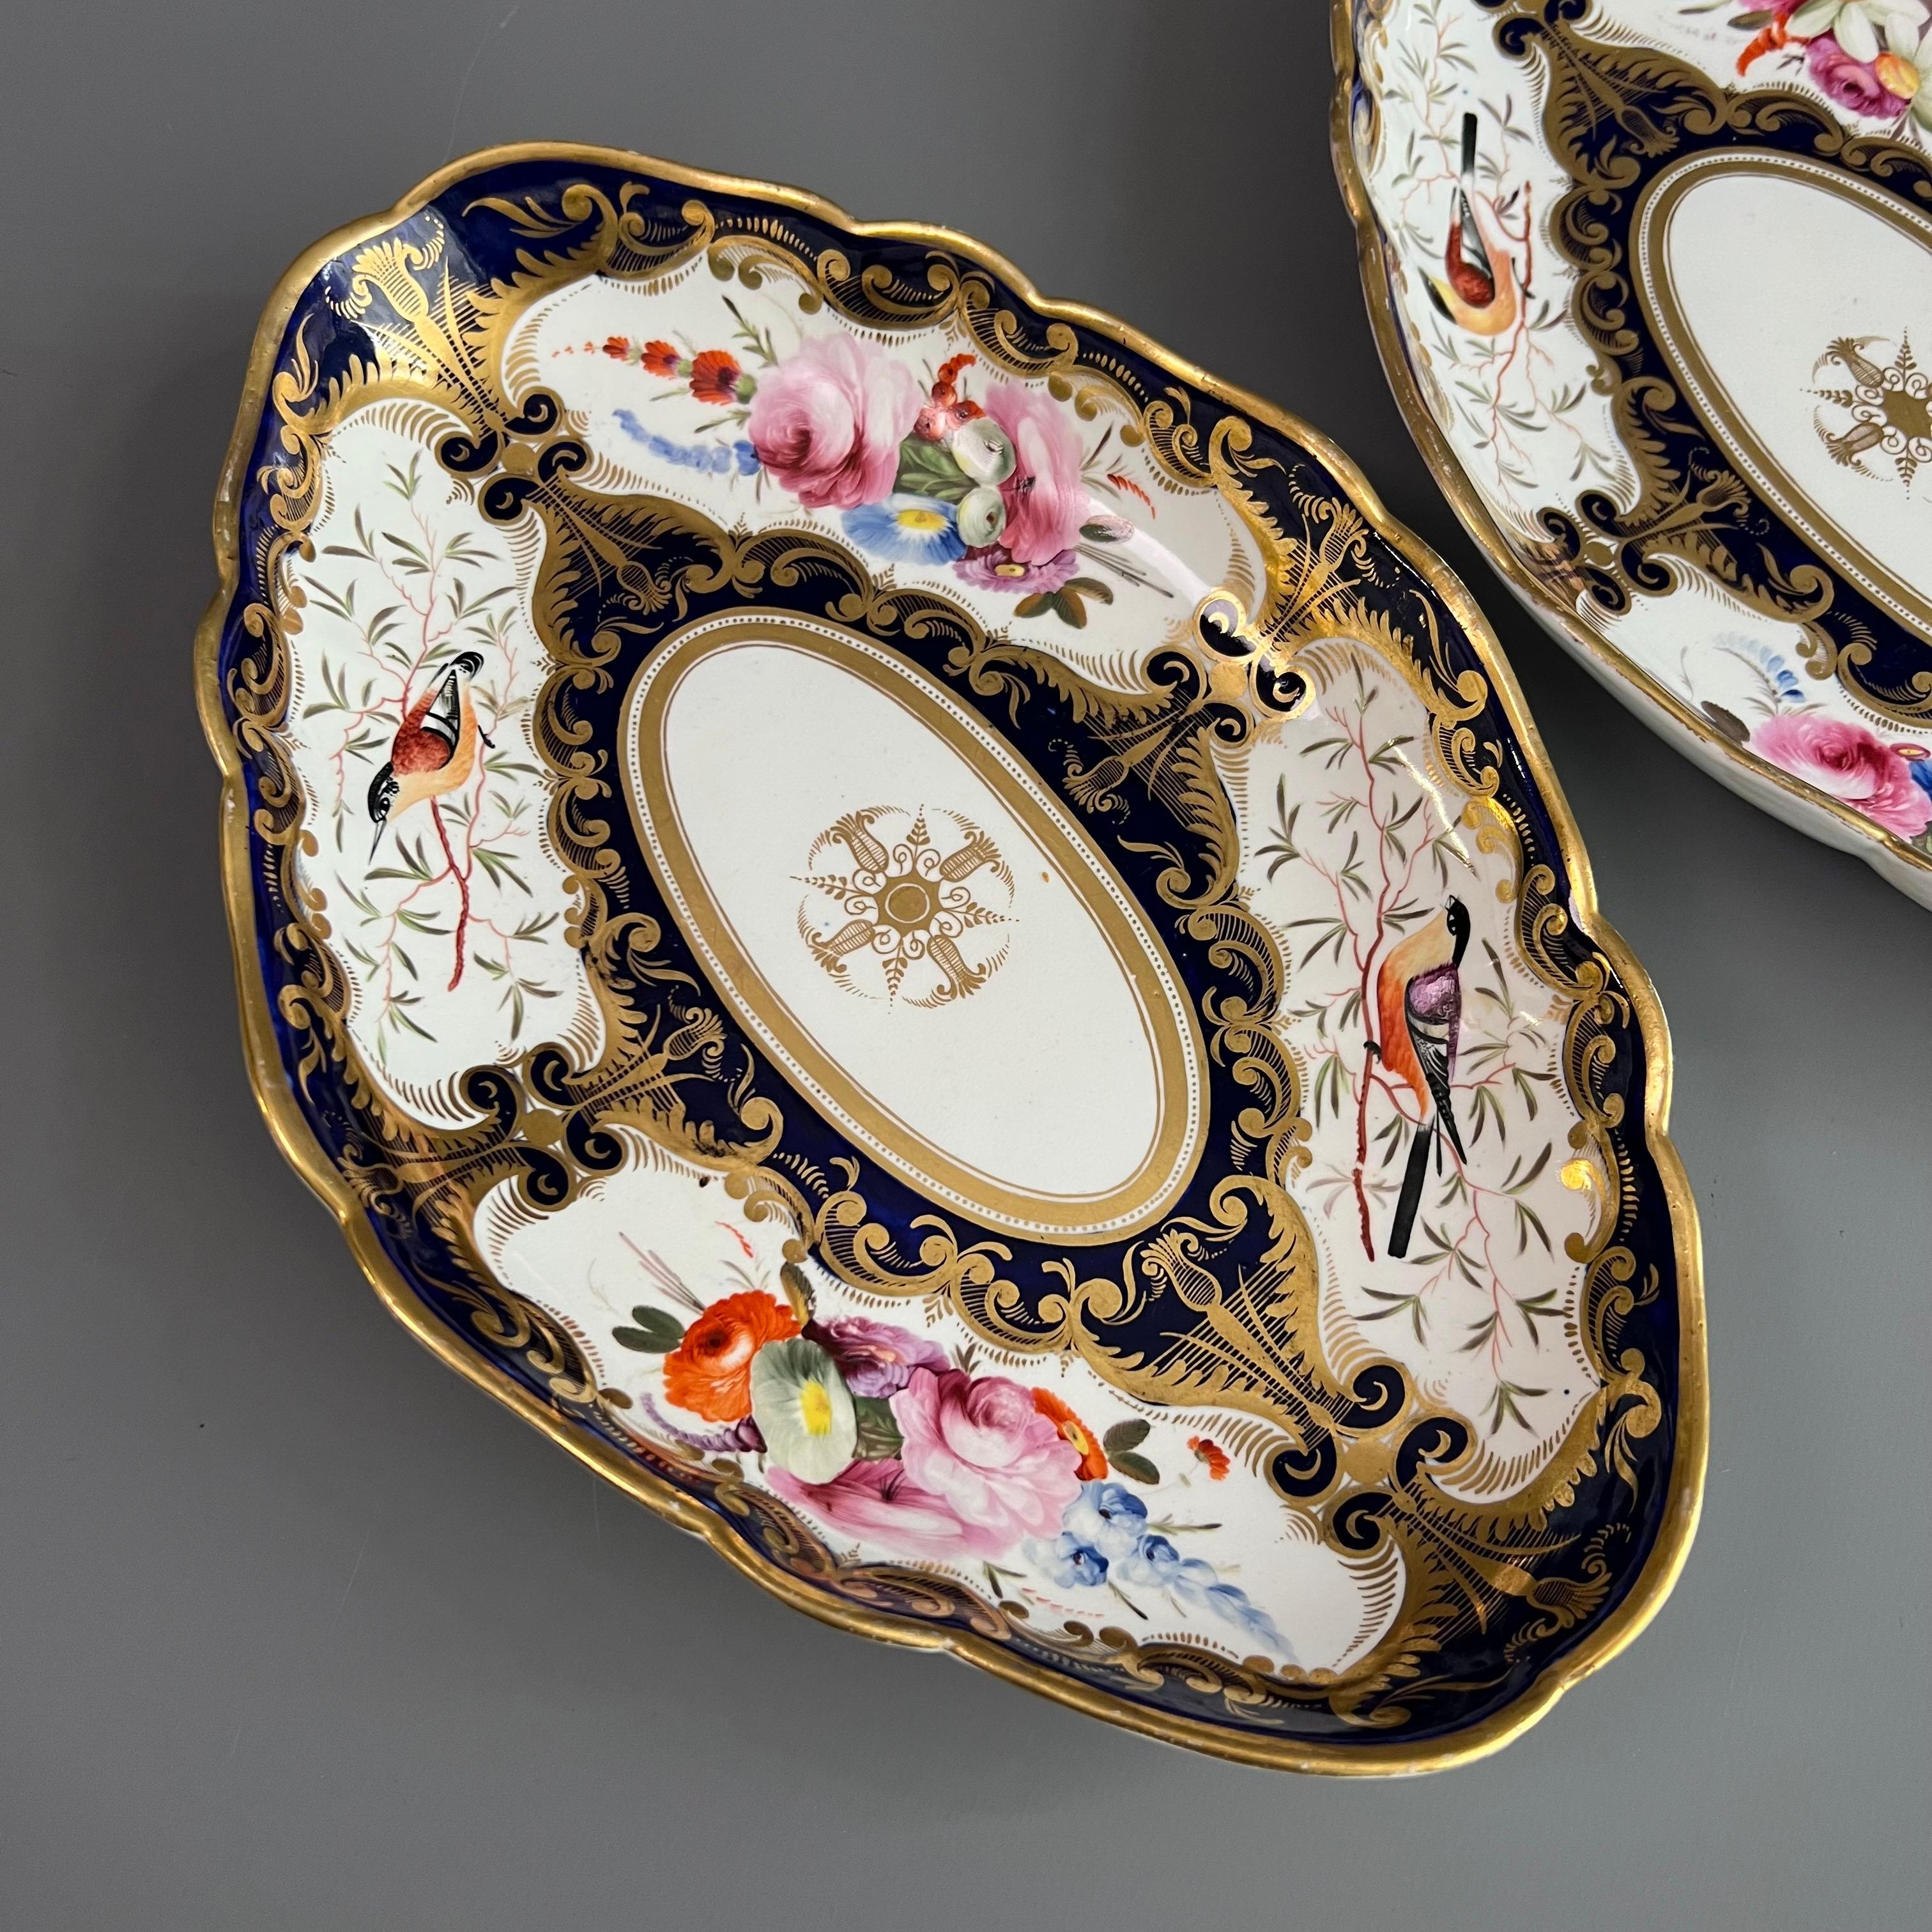 This is a spectacular pair of oval dishes made by Coalport between 1815 and 1820. The dishes bear the famous and very wonderful bird pattern with the number 759. Panels with stunning hand painted birds and flowers are set in a cobalt blue background